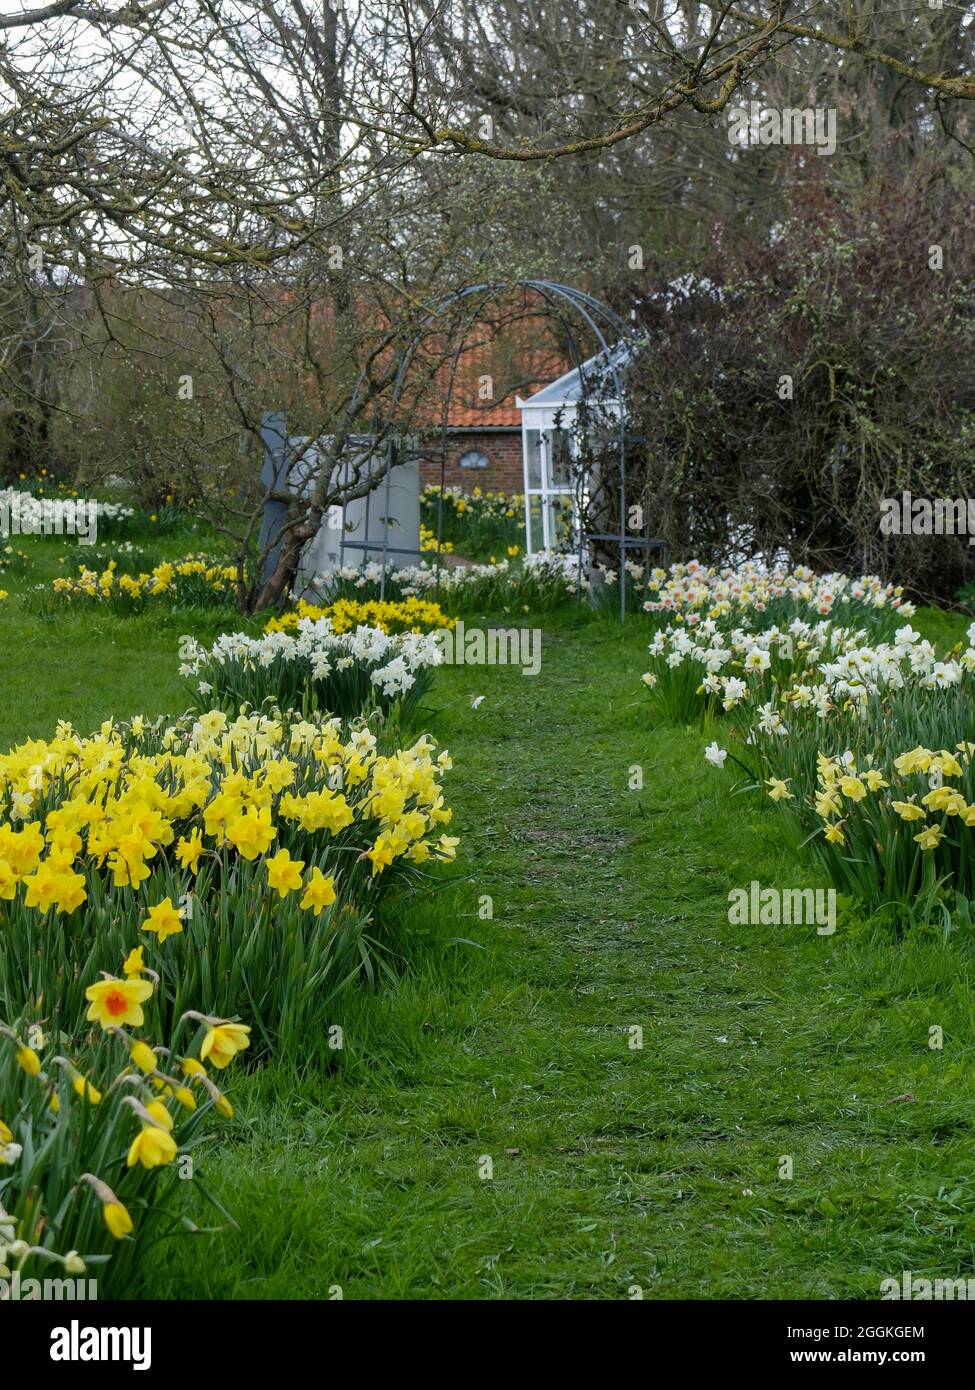 Garden in spring with lots of daffodils (Narcissus pseudonarcissus) Stock Photo